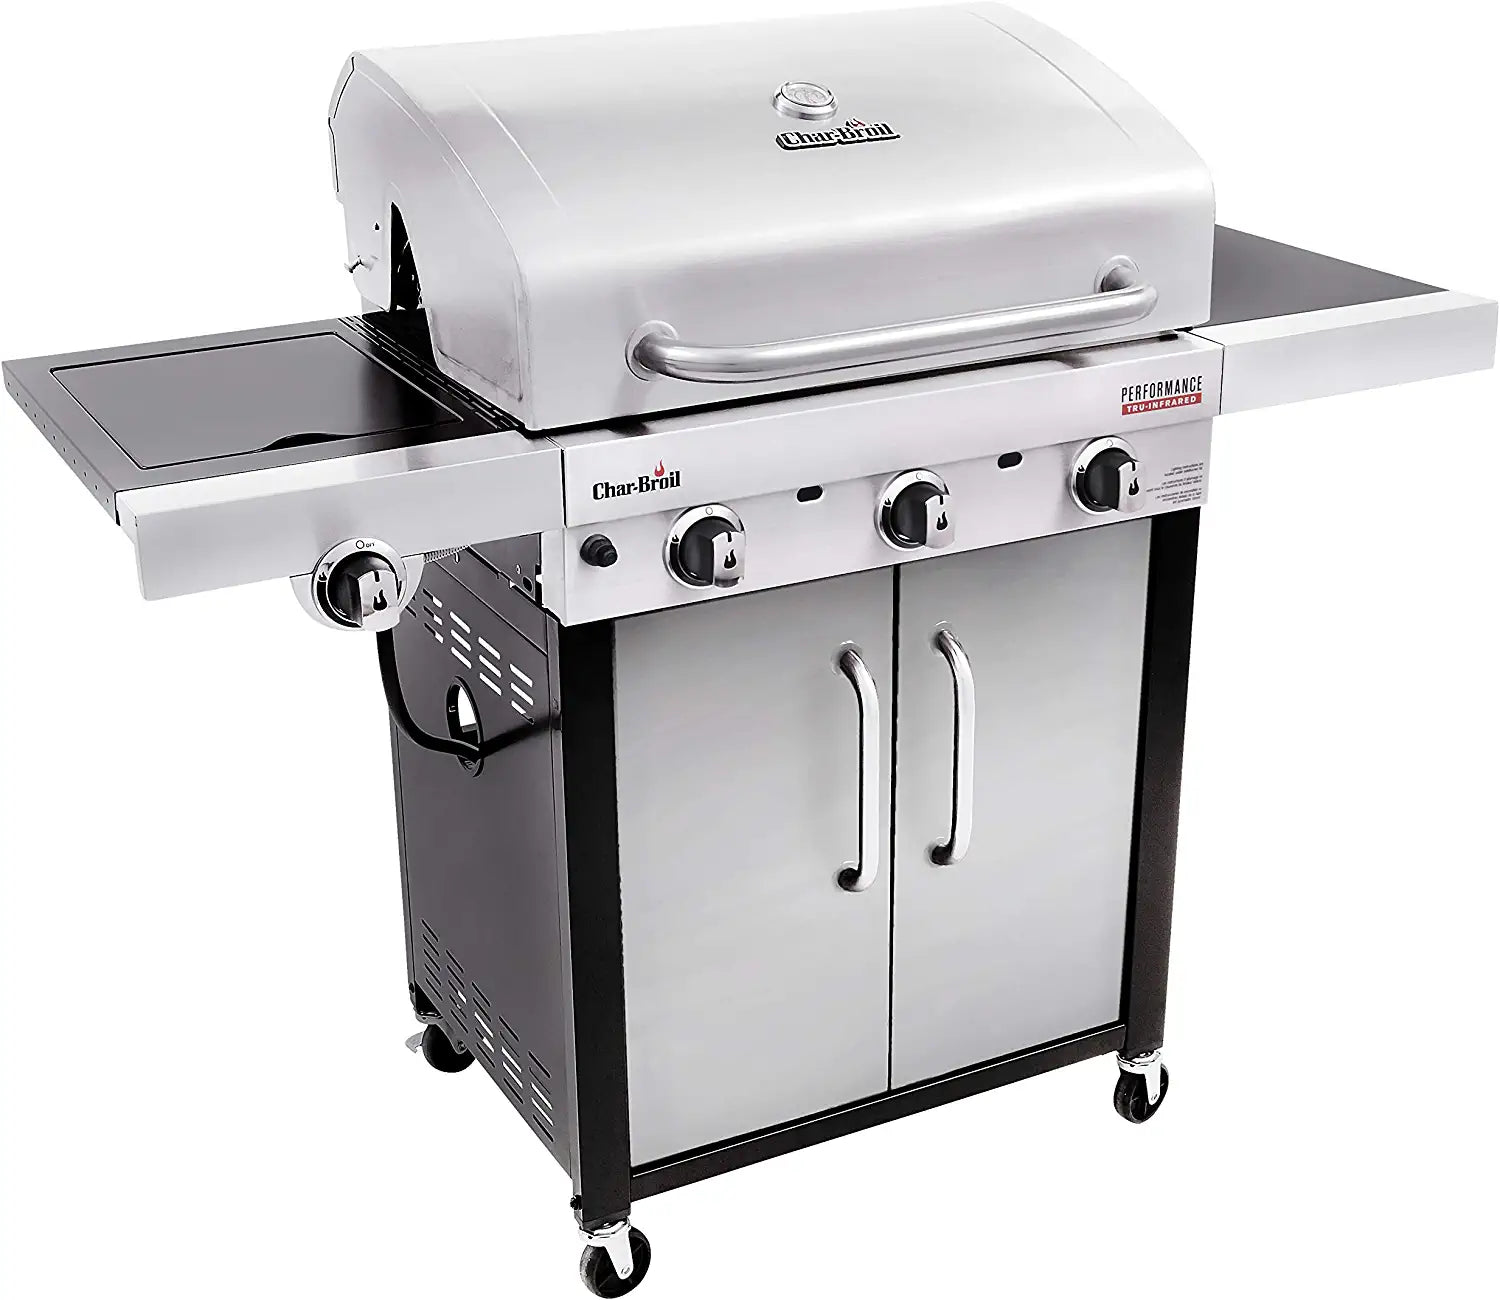 Char-Broil 463371719 Performance TRU-Infrared 3-Burner Cabinet Style Gas Grill, Stainless Steel